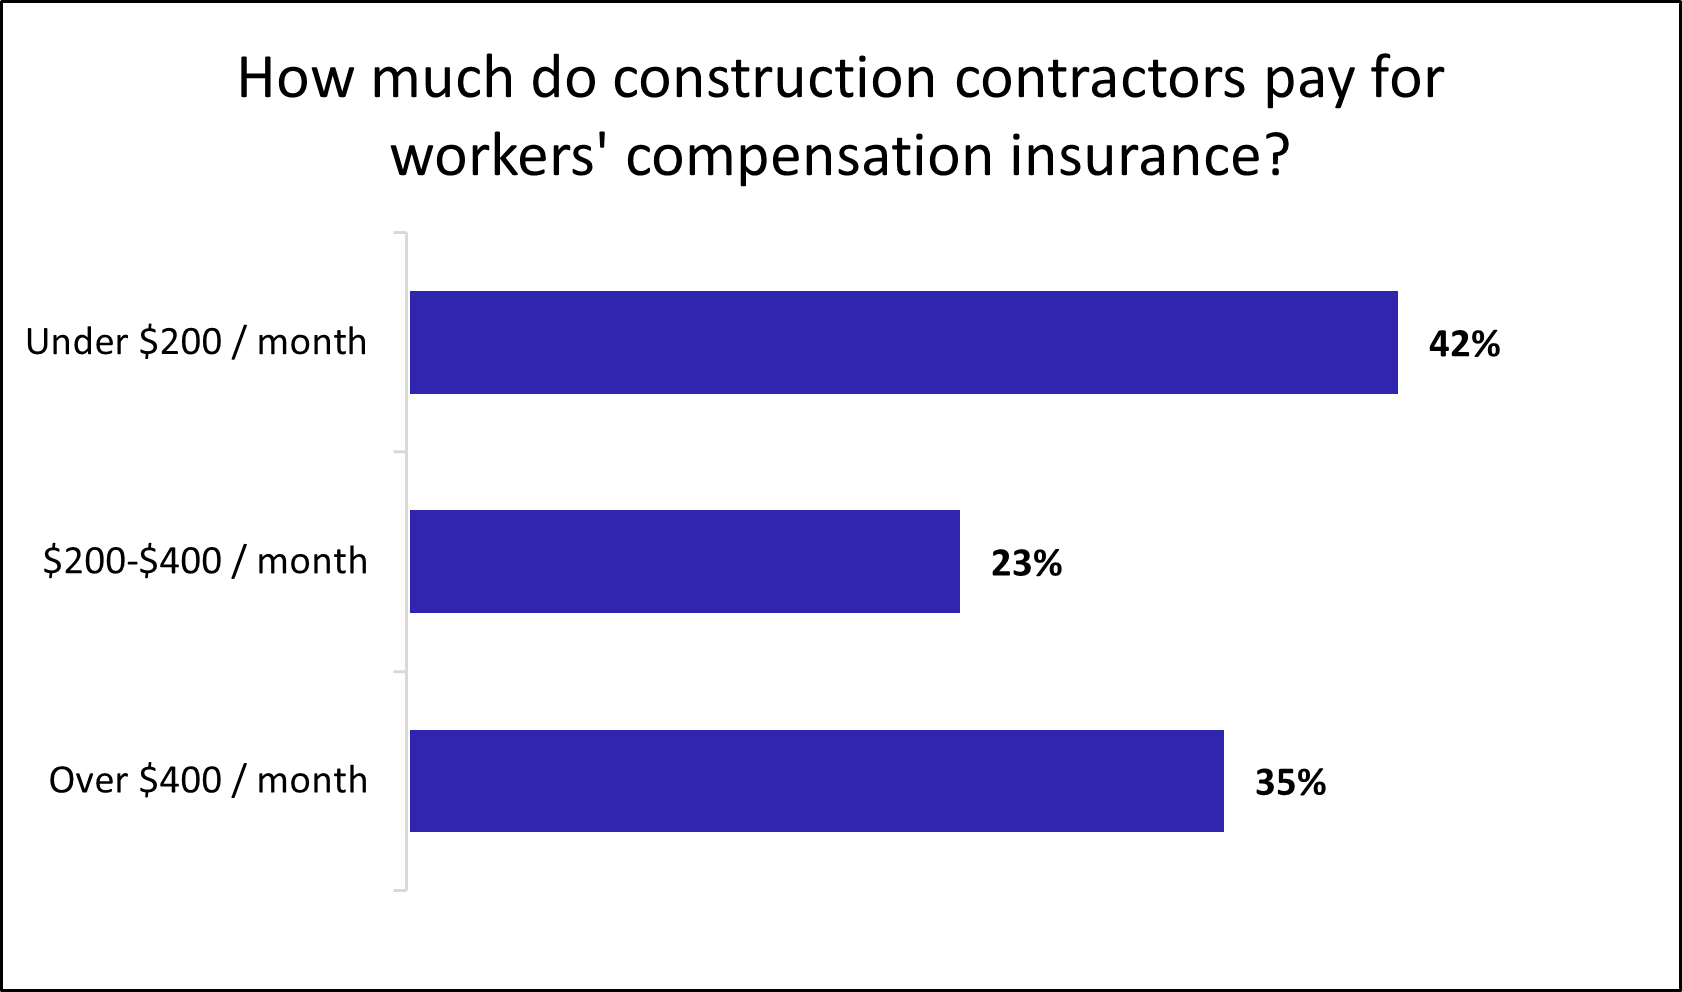 How much do construction contractors pay for workers' compensation insurance?